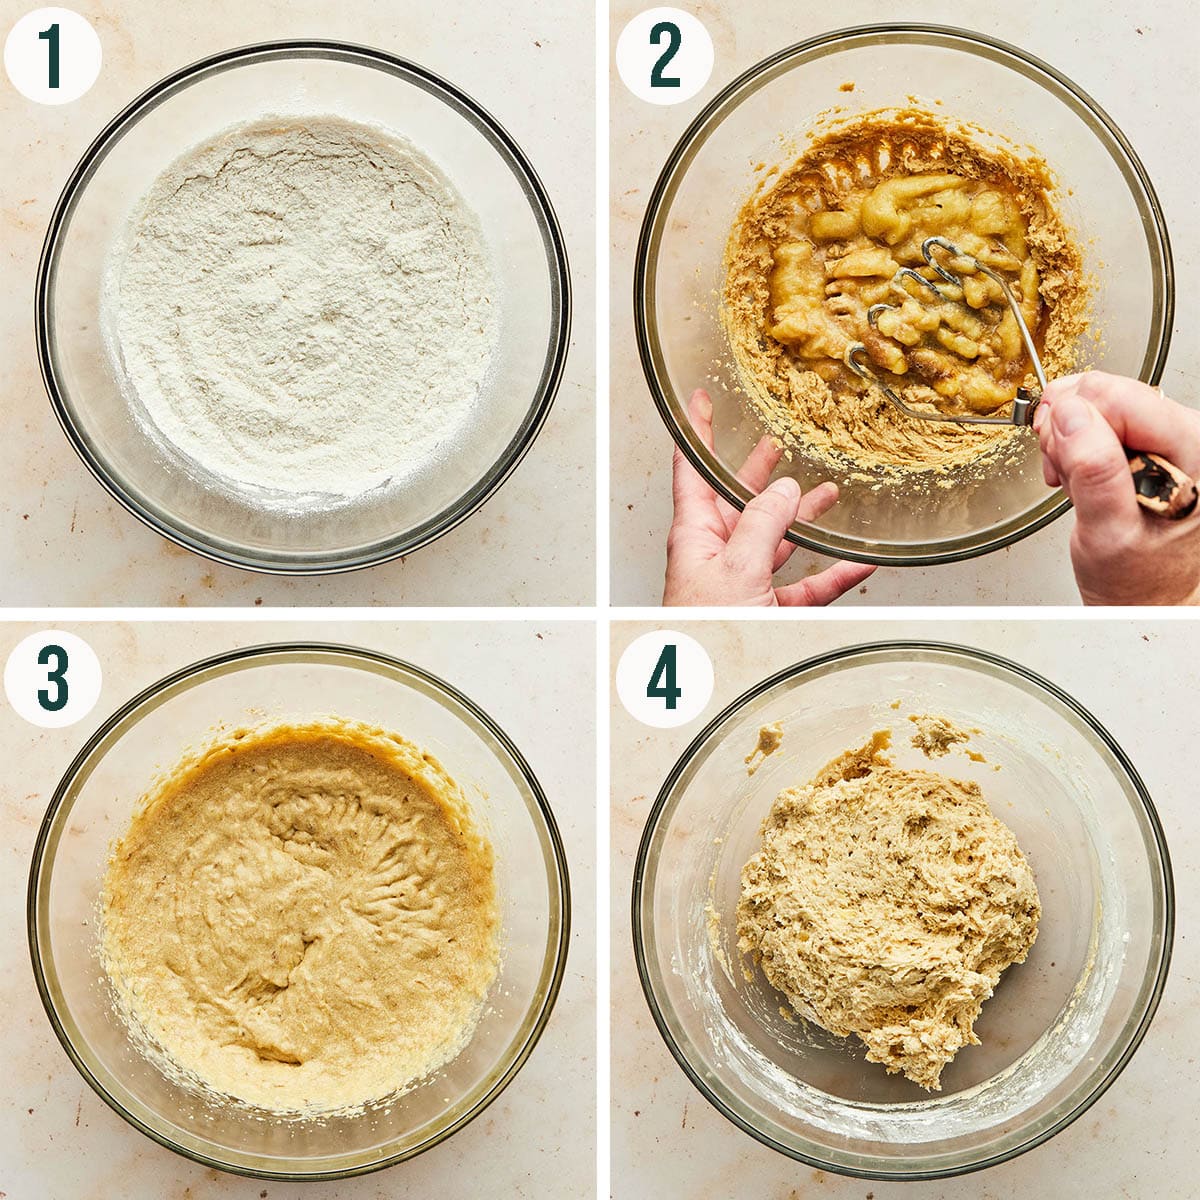 Banana muffins steps 1 to 4, making the batter.